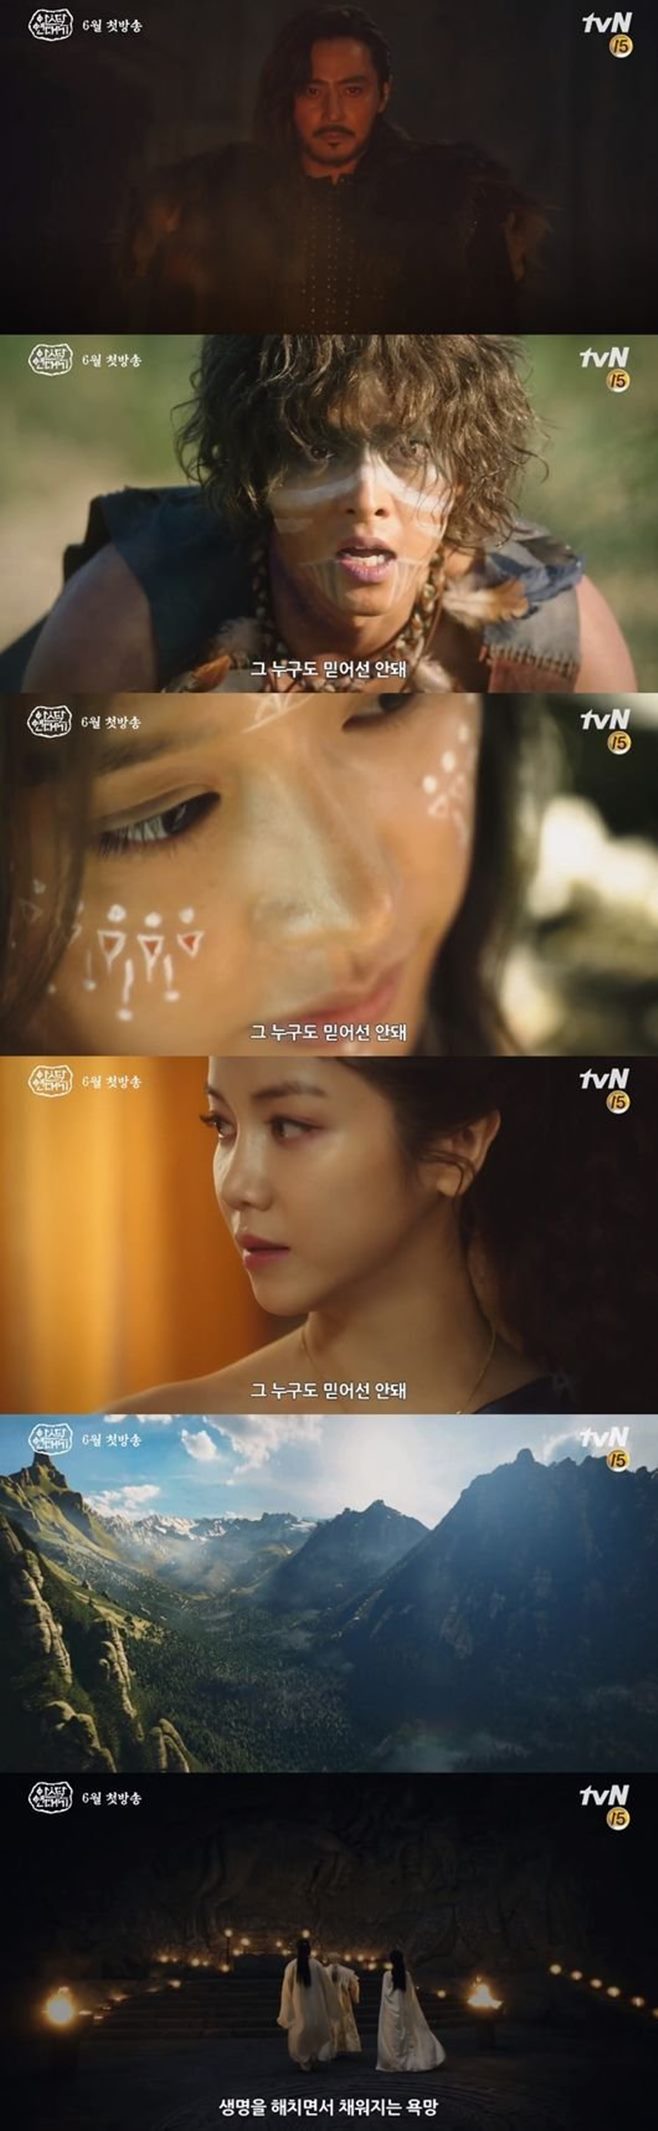 The teaser of the Asdal Chronicle predicted the completeness of the past class.On the 12th, TVNs new Saturday drama Asdal Chronicle (playplayed by Kim Young-hyun, Park Sang-yeon and director Kim Won-seok) released a drama teaser video.The released video is mainly narrated by Eunsum (Song Joong-ki) asking about Tagon (Jang Dong-gun) and Desire to be filled while harming life, no one should believe it.Here, the images of Tanya (Kim Ji-won) and Tae-al-ha (Kim Ok-bin), who boast beautiful beauty, were closed up.This situation amplifies the relationship between Tagon and the island, the curiosity of Tanya and Taealha, who are entangled with the two, and their process of establishing Asdal.Especially, Asdal Chronicles is known as a masterpiece with tens of billions of won, and as a result, the huge set and nature in the teaser also steals attention.The Asdal Chronicle is an ancient human historical drama about the birth of the nation and the civilization of the first era in Korea.It depicts the struggle, harmony, and mythical heroic stories of people living in the virtual land As.Kim Young-hyun, Park Sang-yeon, who wrote Kwon Ryong I Narsa, Deep Rooted Tree, and Seondeok Queen, and Kim Won-seok PD, who directed microbiology, signal and my uncle,